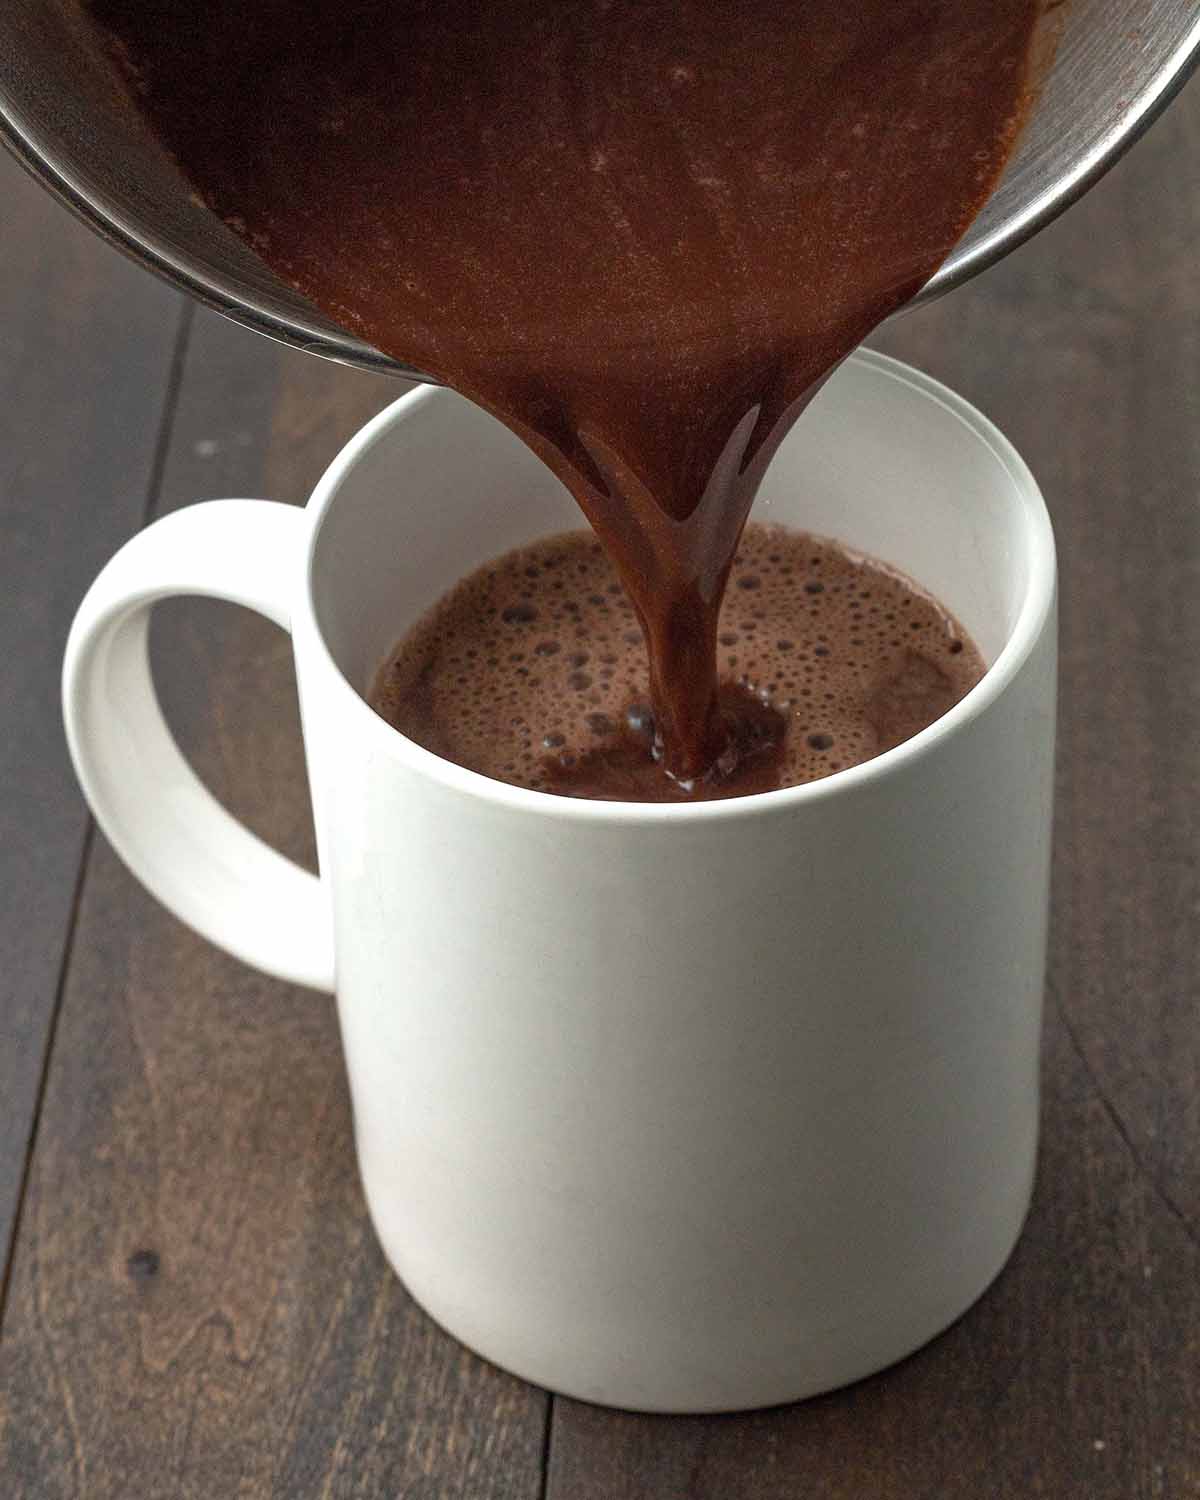 Homemade peppermint hot chocolate being poured from a pot into a white mug.